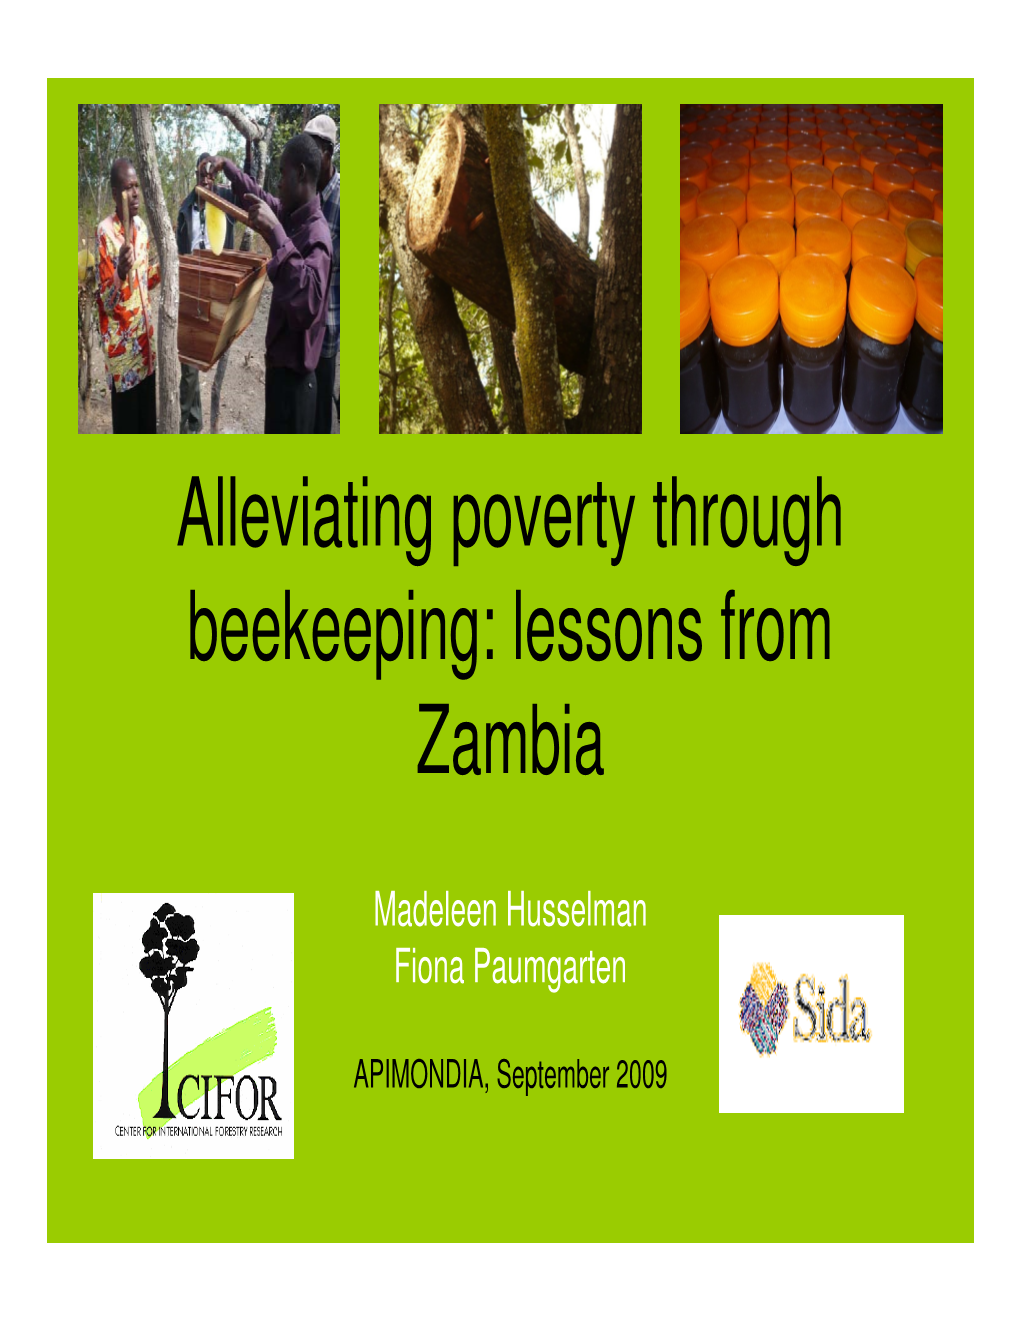 Alleviating Poverty Through Beekeeping: Lessons from Zambia